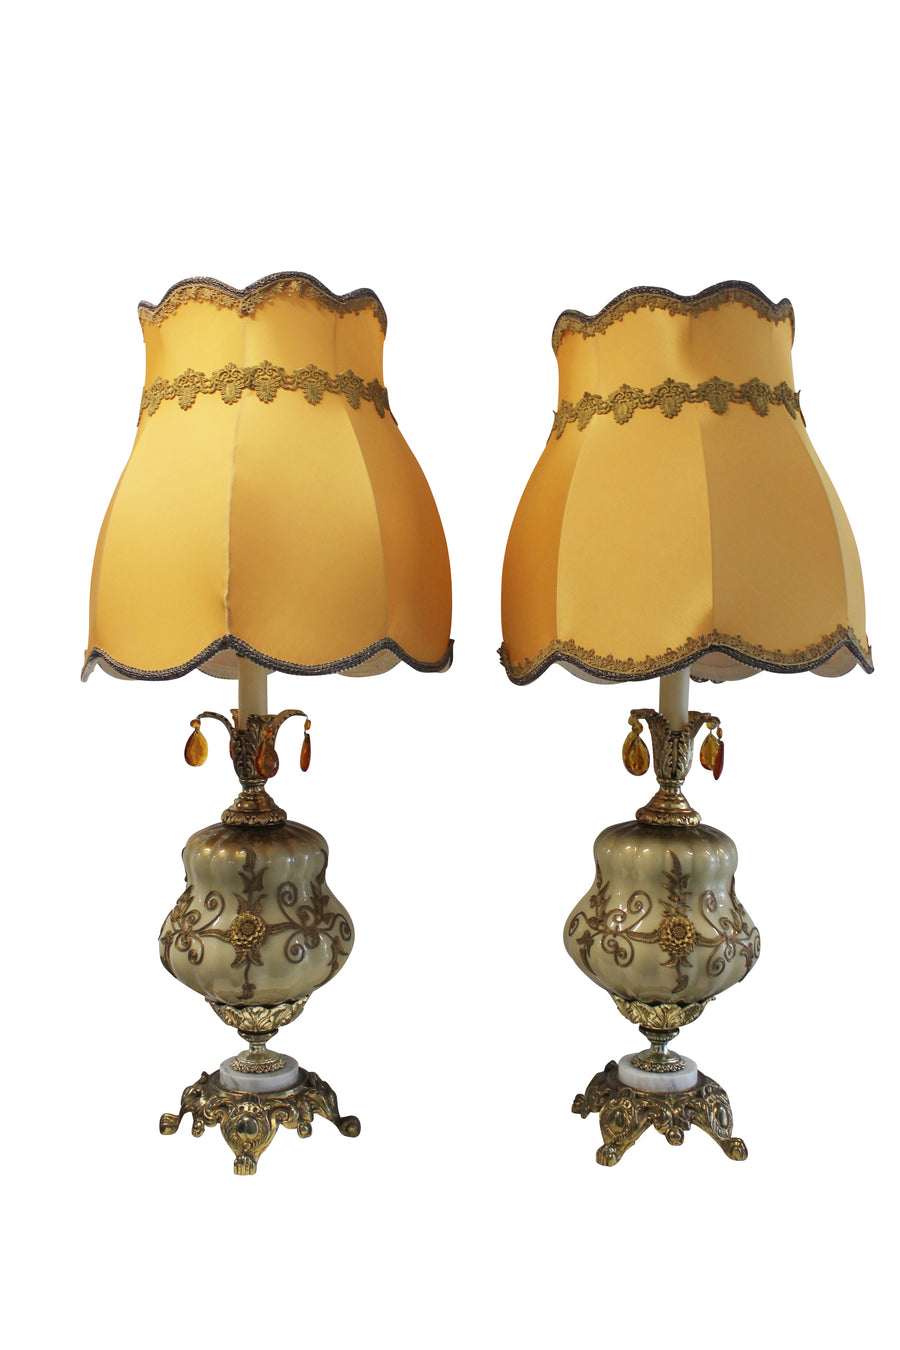 Gaudy Table Lamps